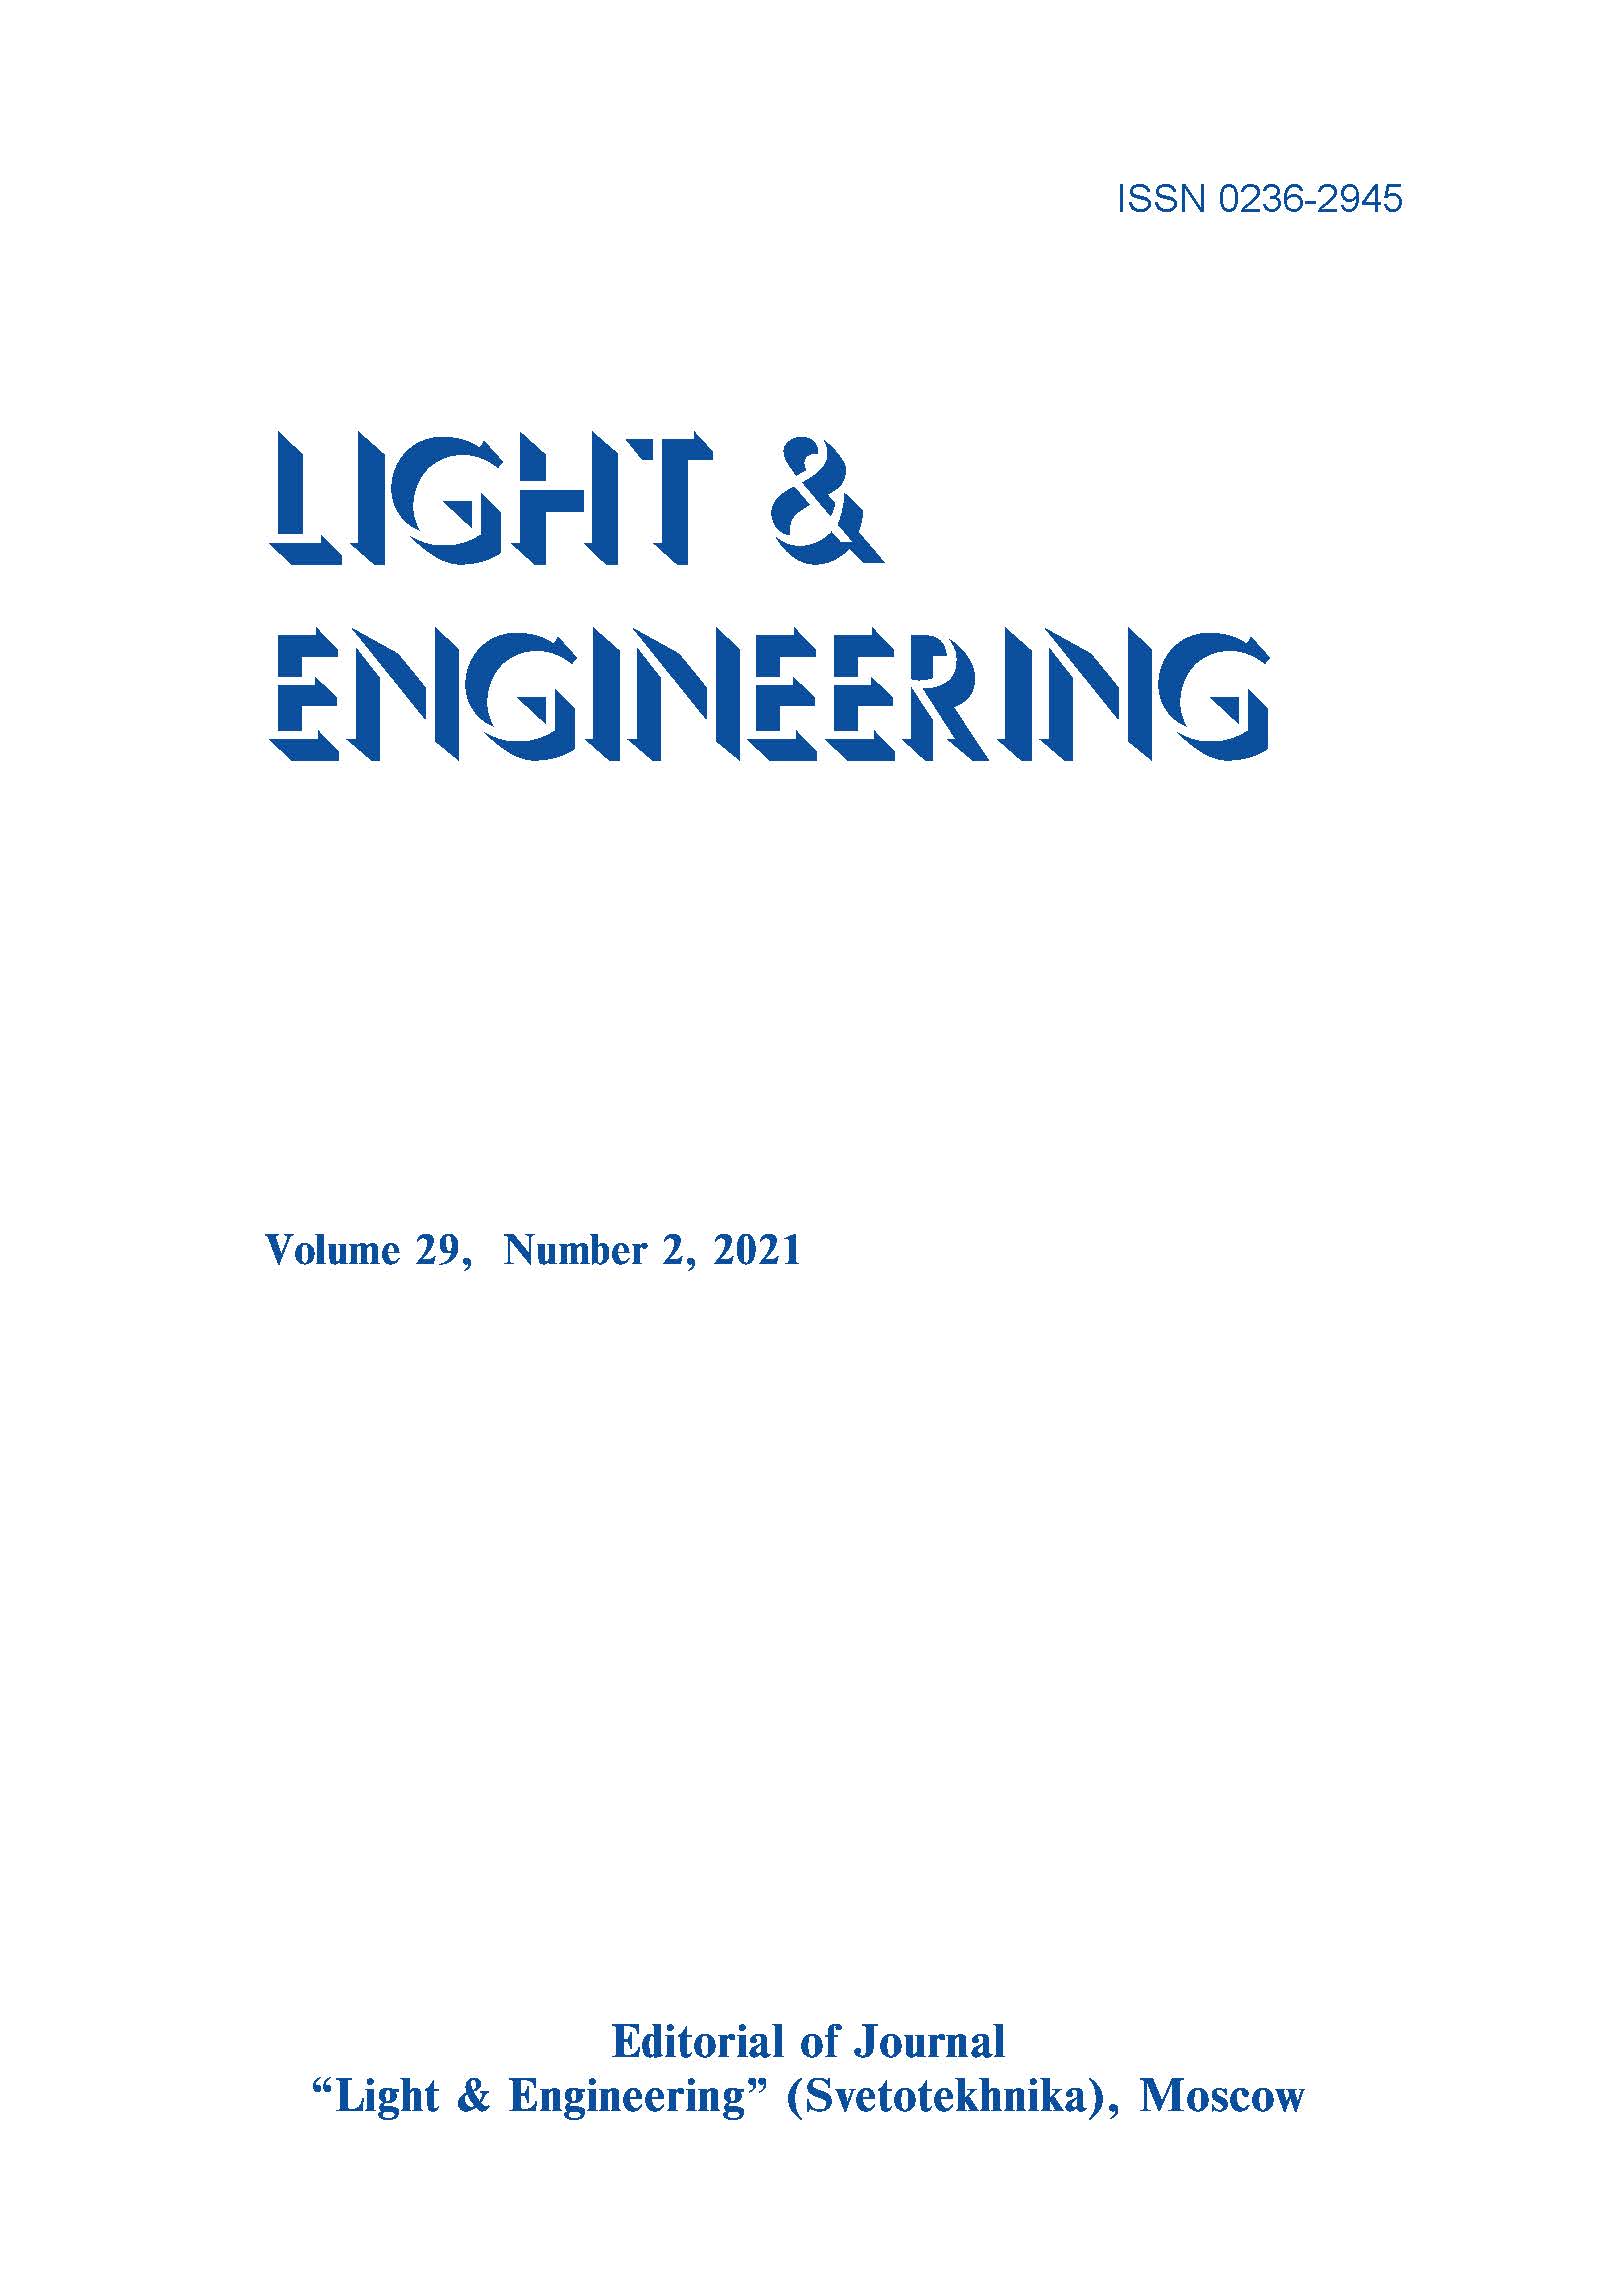 Design Concept for Lighting Phytosystems for Public Spaces L&E, Vol. 29, No. 2, 2021